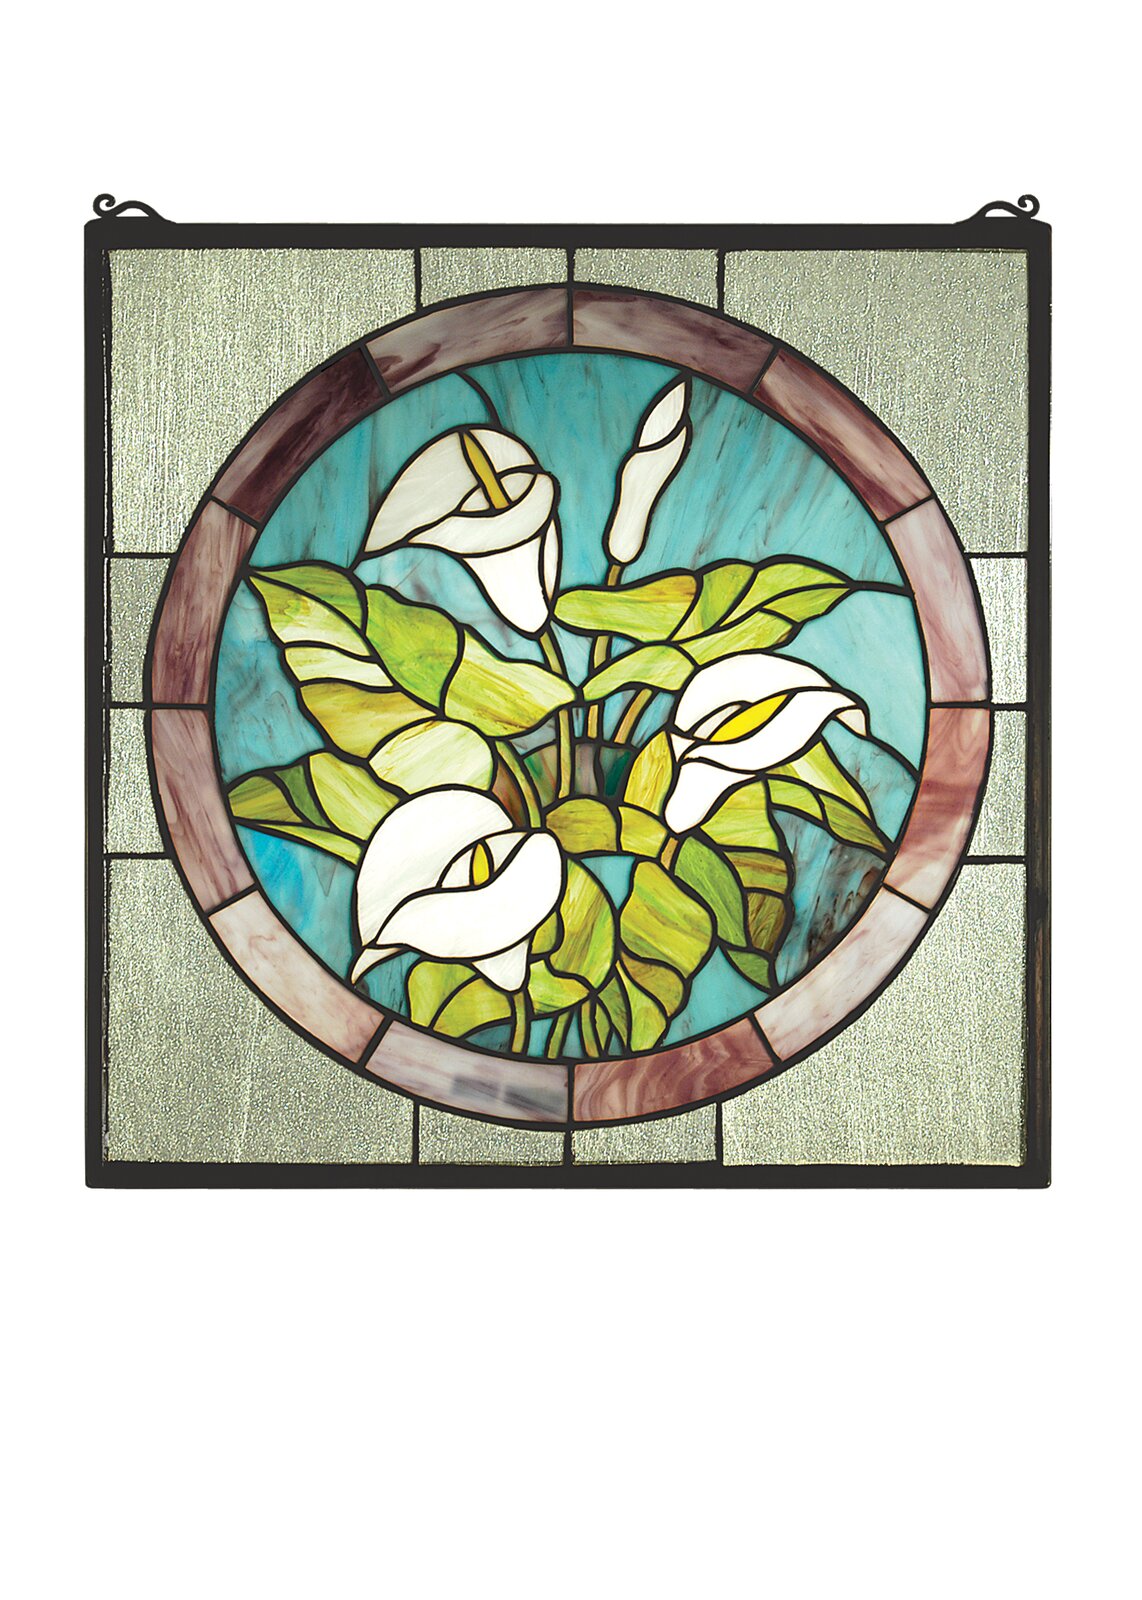 Beautiful Stained Glass Wall Art - Calla Lily Stained Glass Window